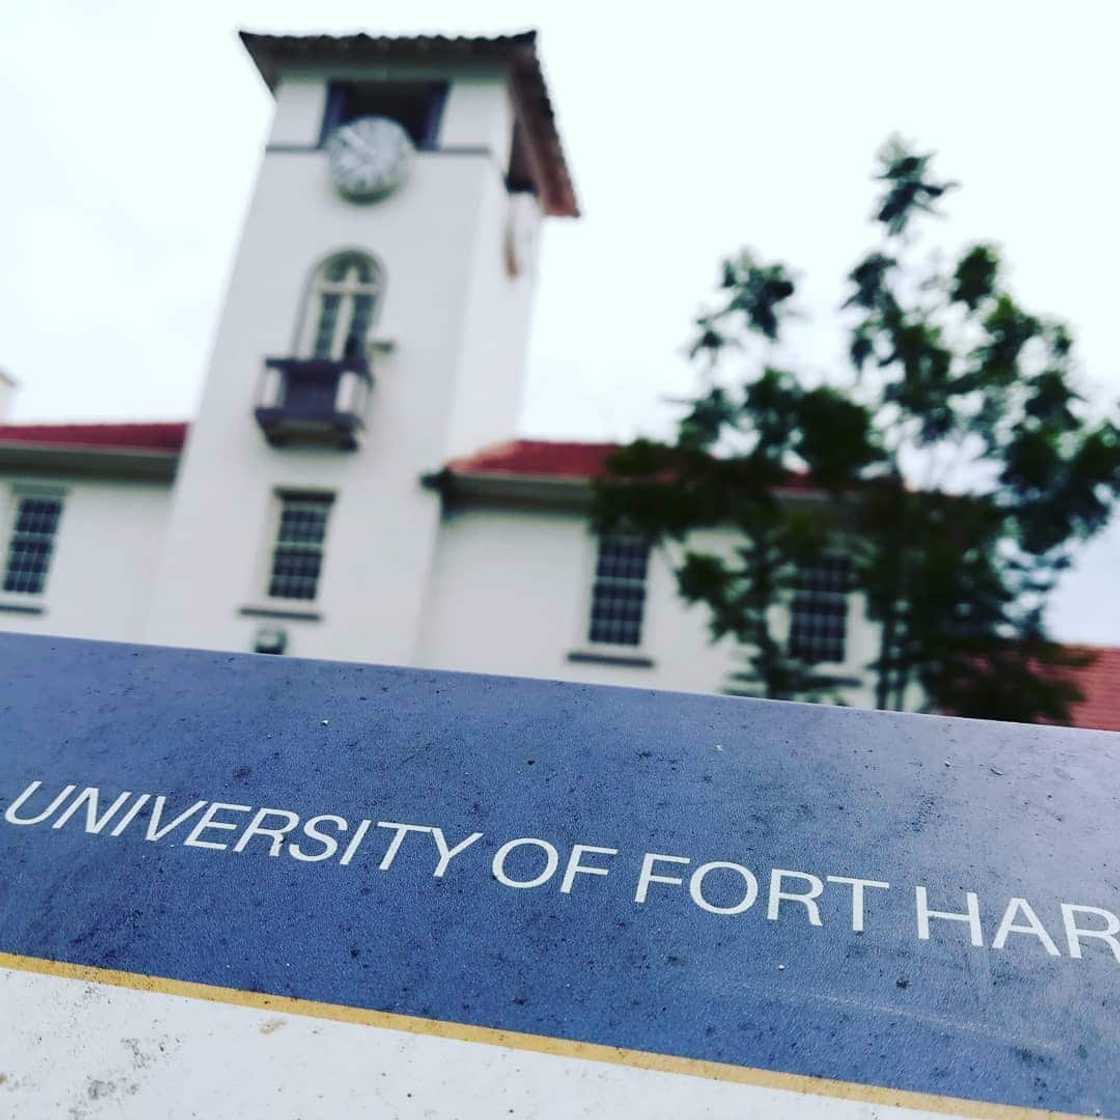 University of Fort Hare courses application registration